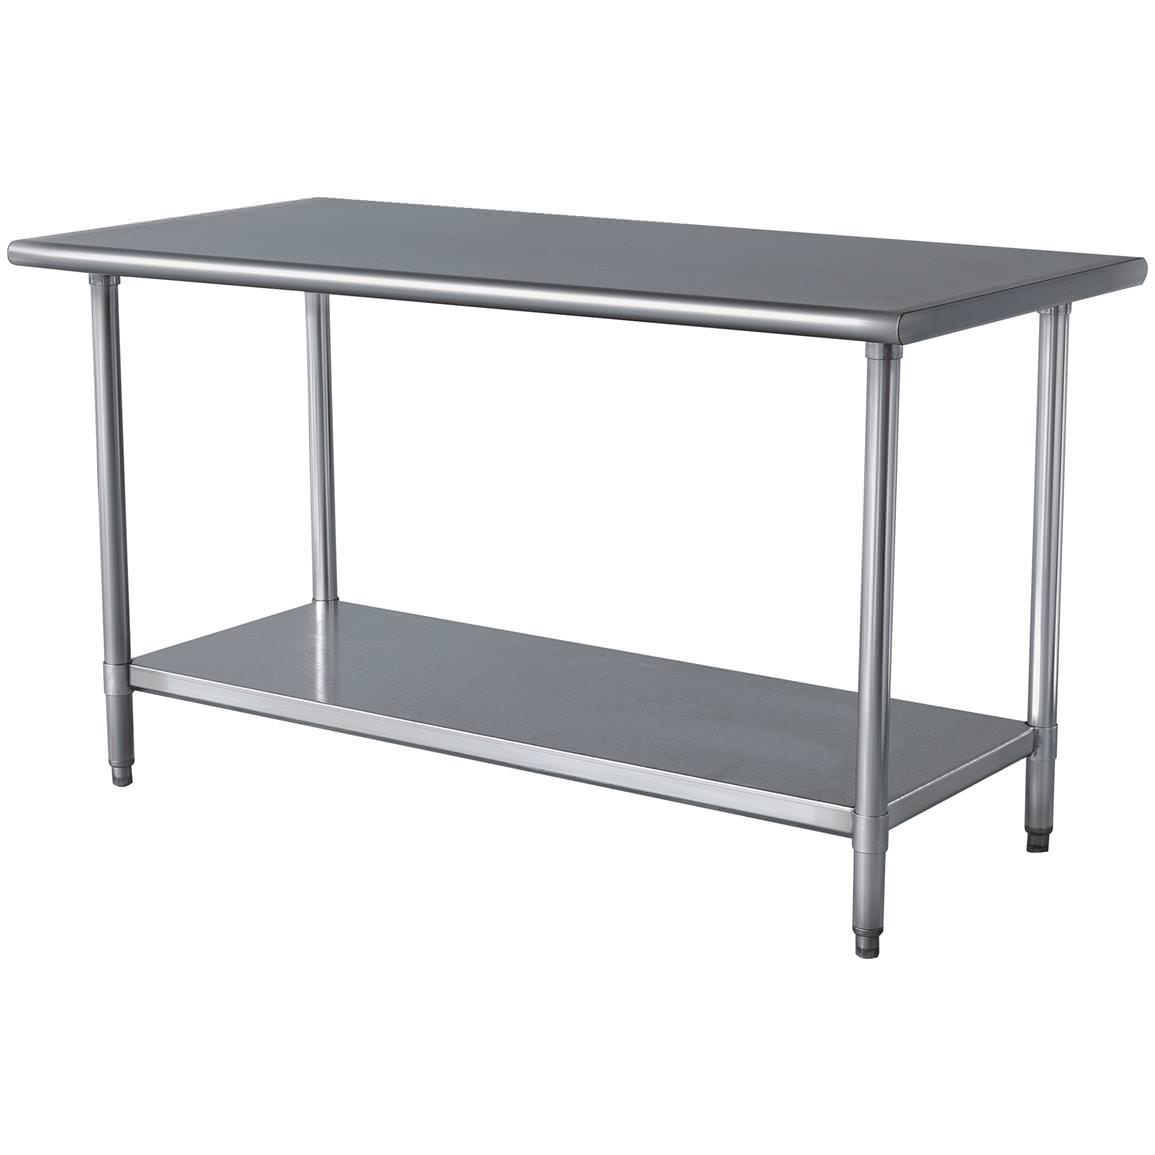 Image of: Cheap Stainless Steel Tables